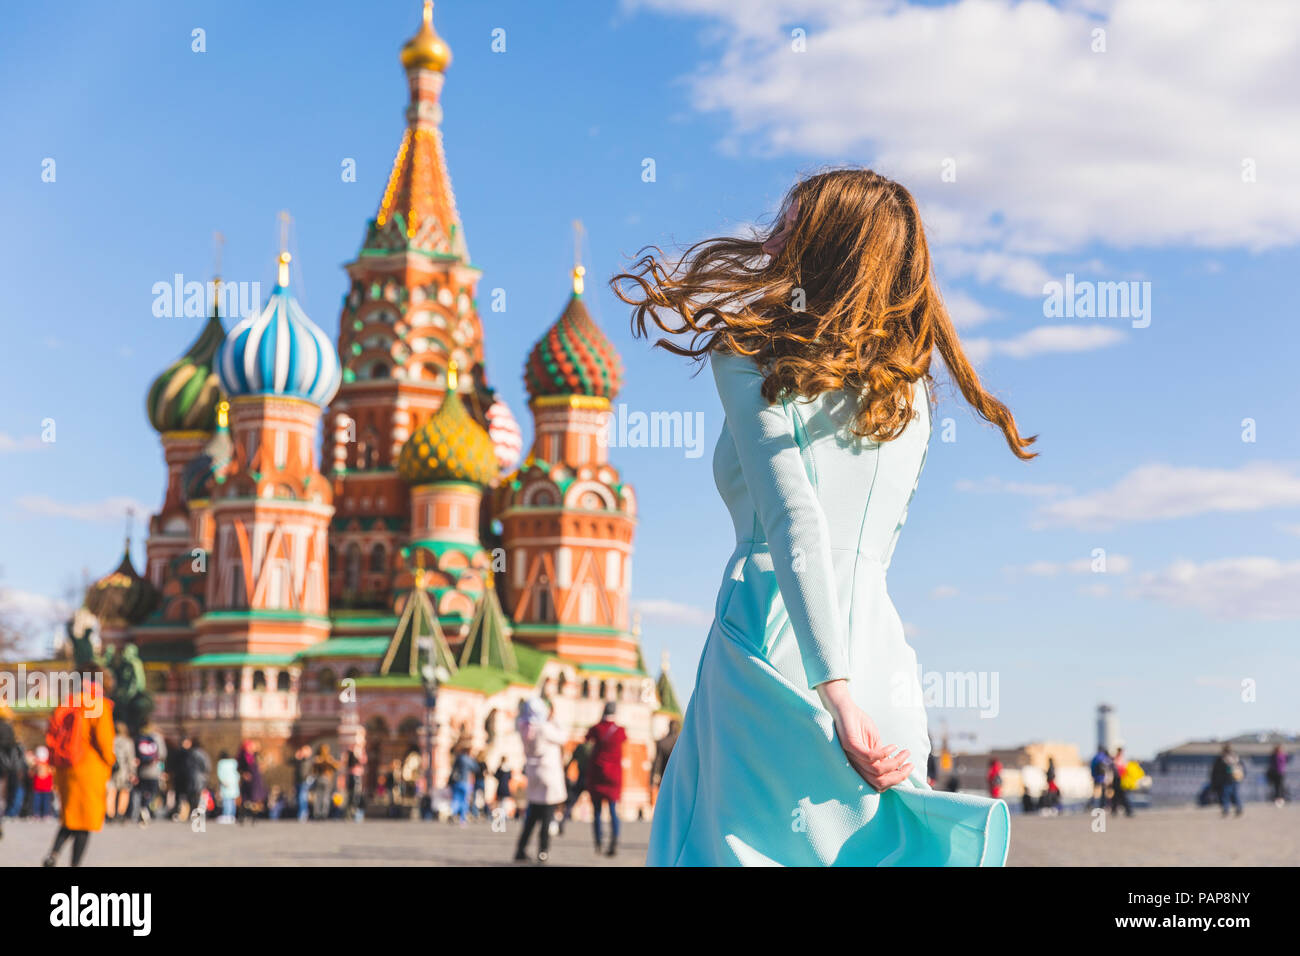 Russia, Moscow, Red Square, teenage girl rotating Stock Photo